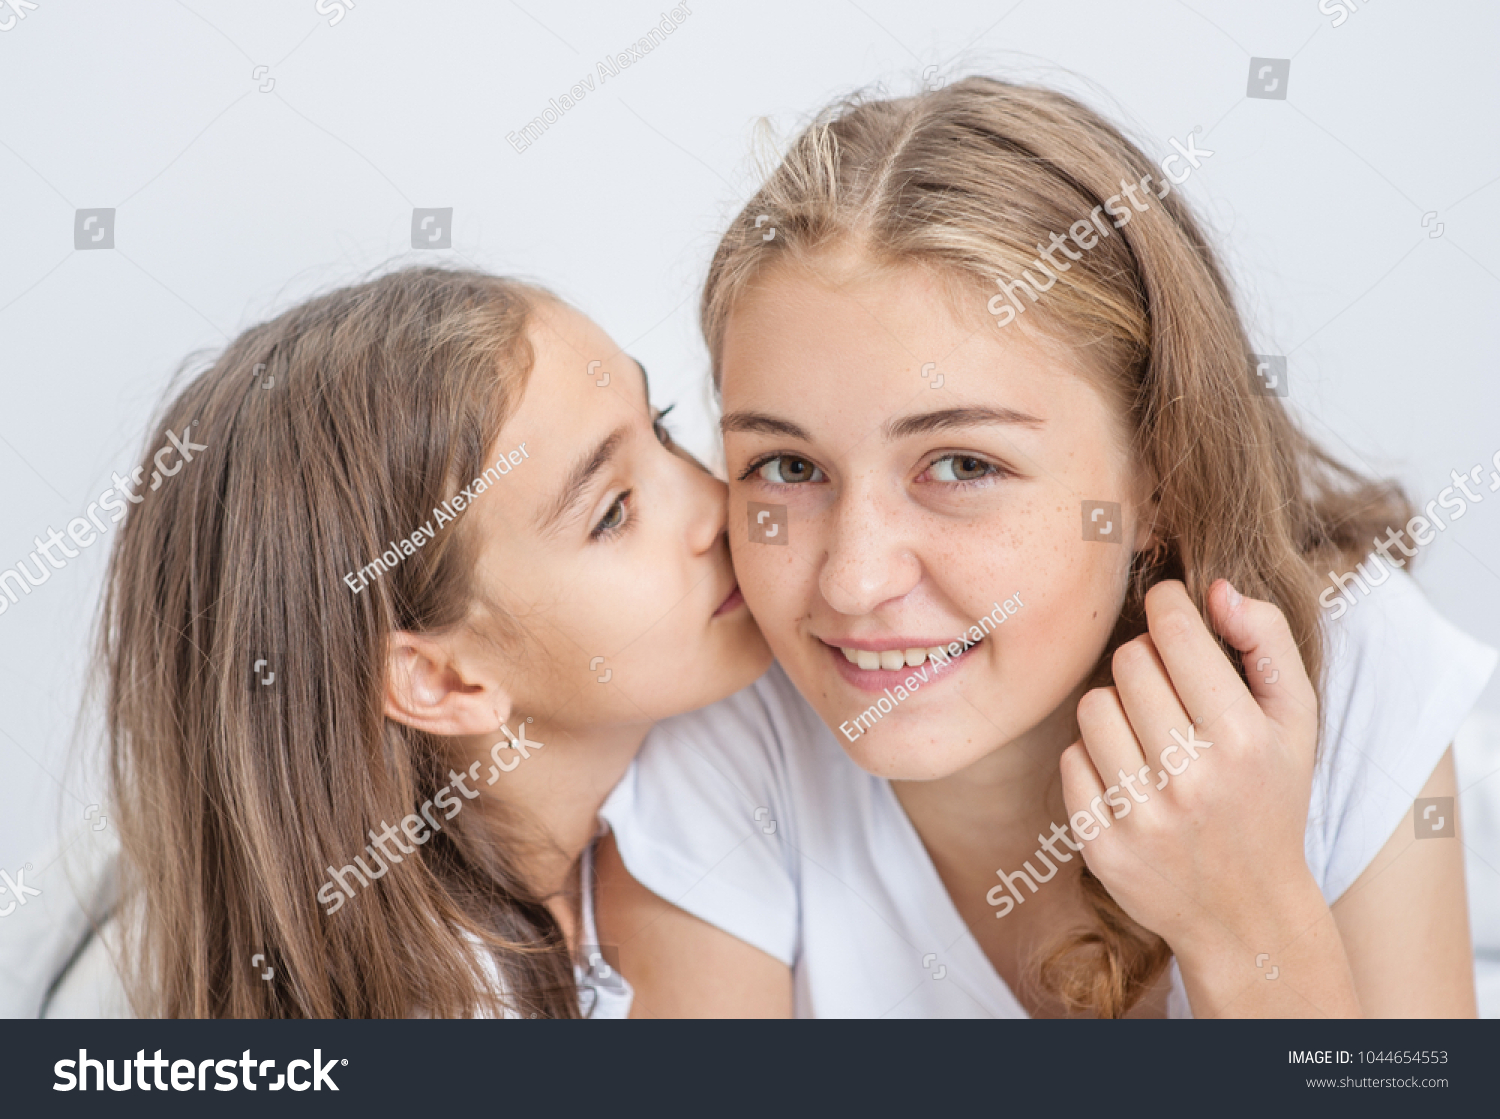 Young Girls Kisses